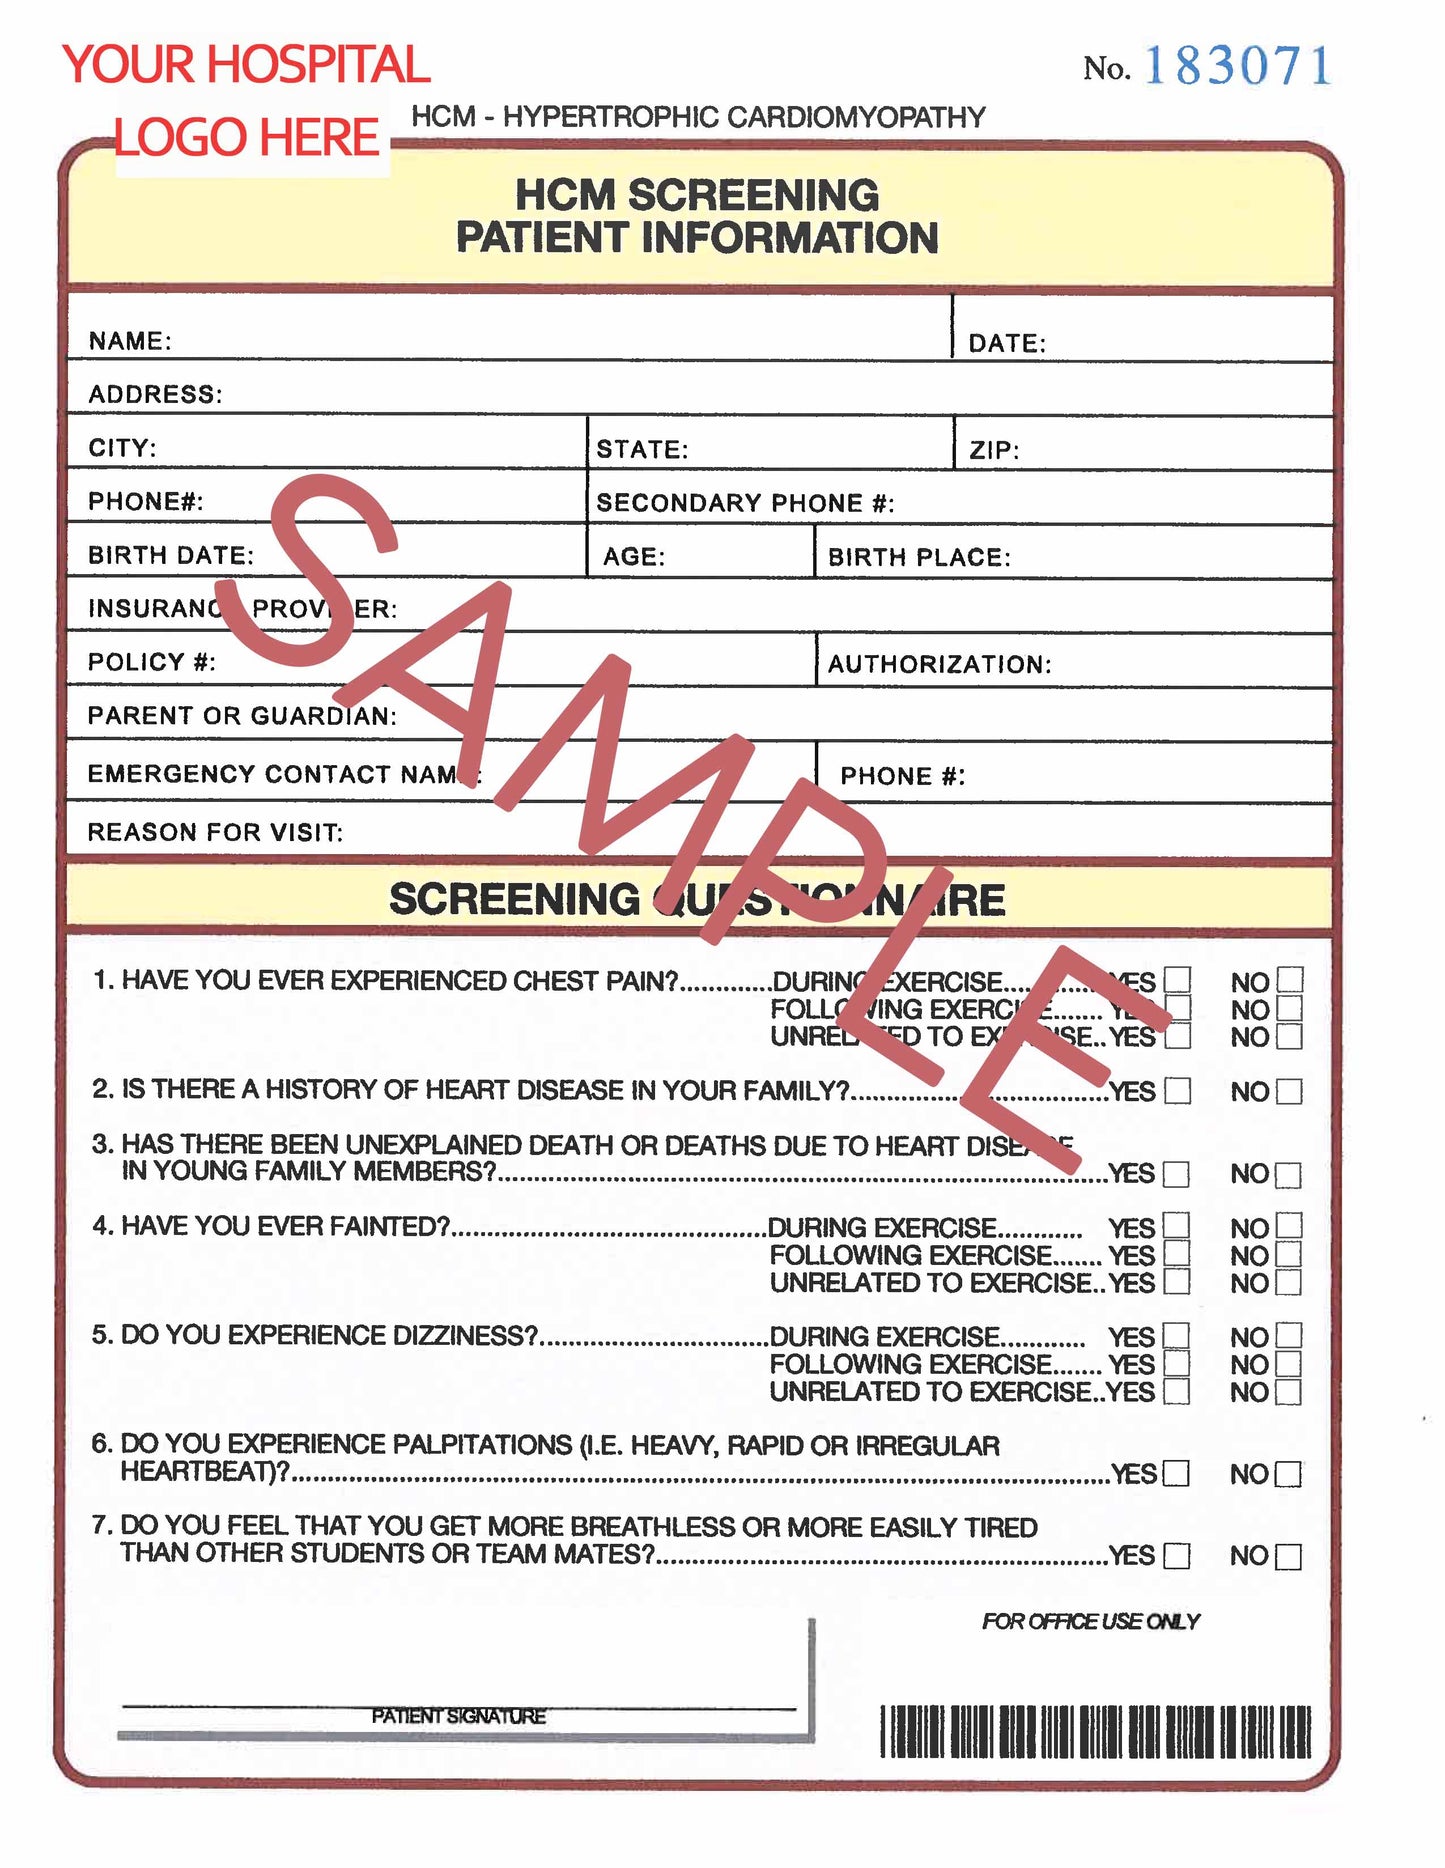 Labor and Delivery Admission Form (6 pages)